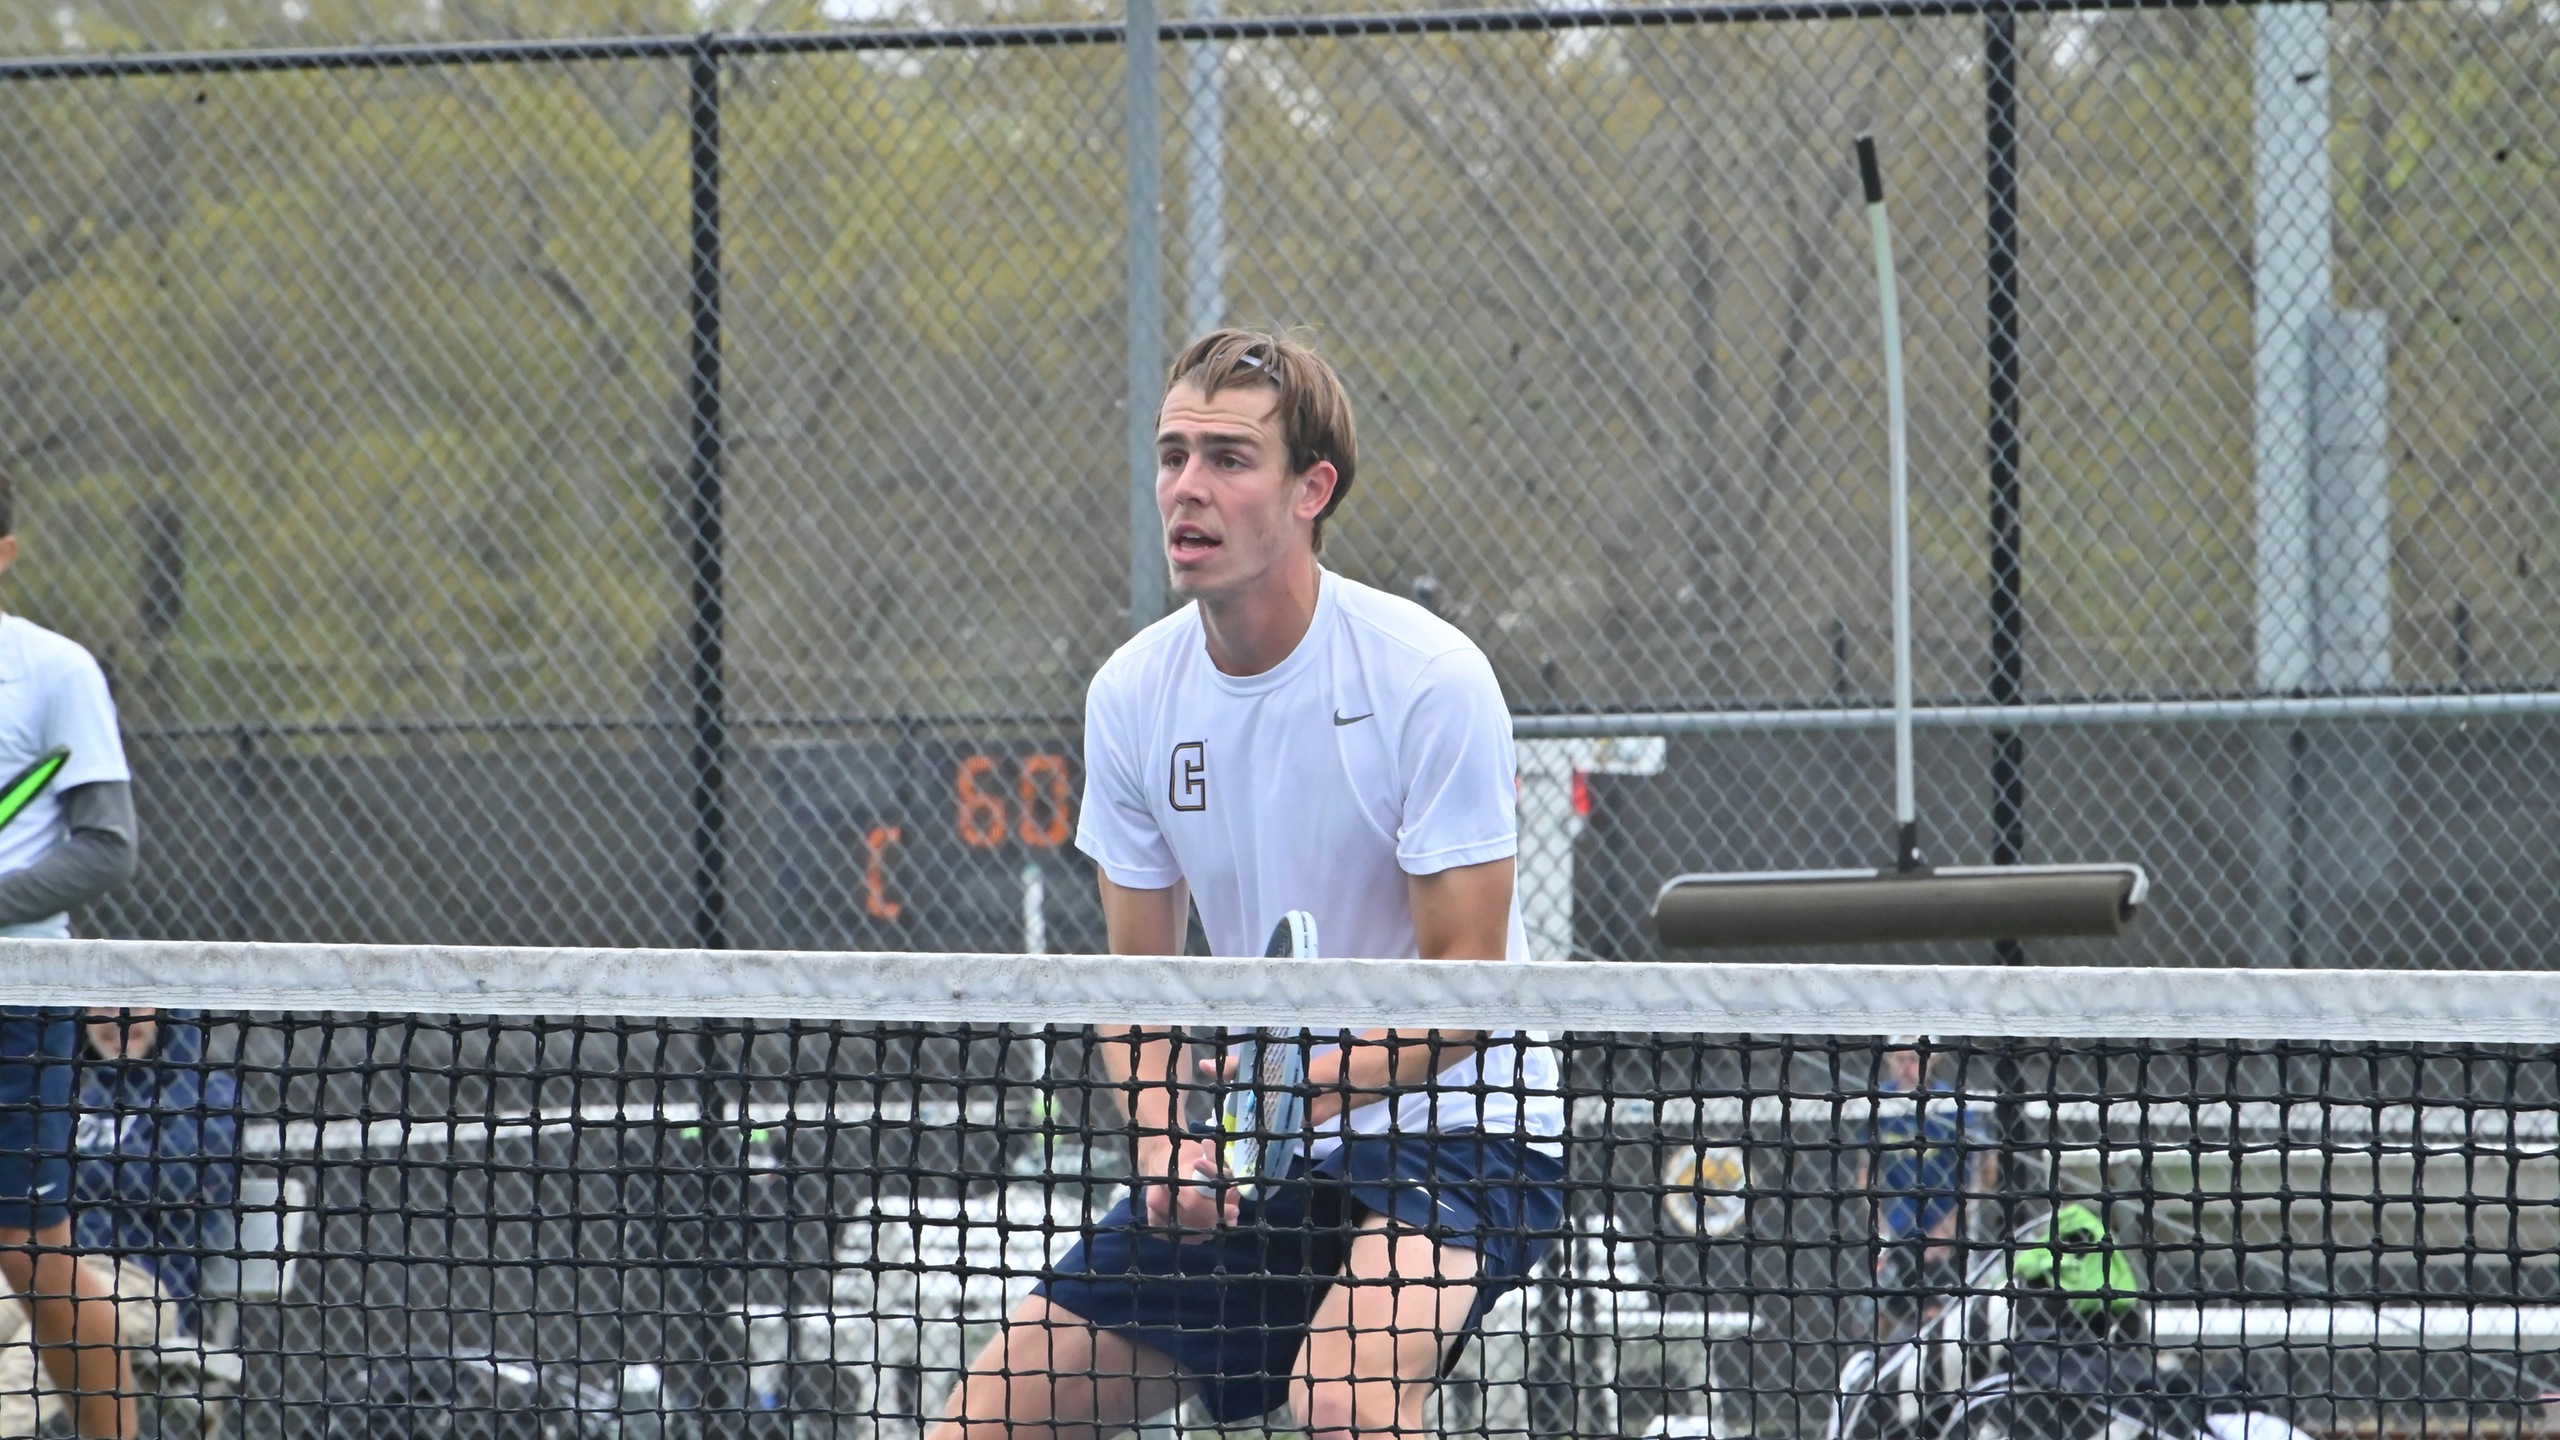 Men’s Tennis Drop a Close One on the Road